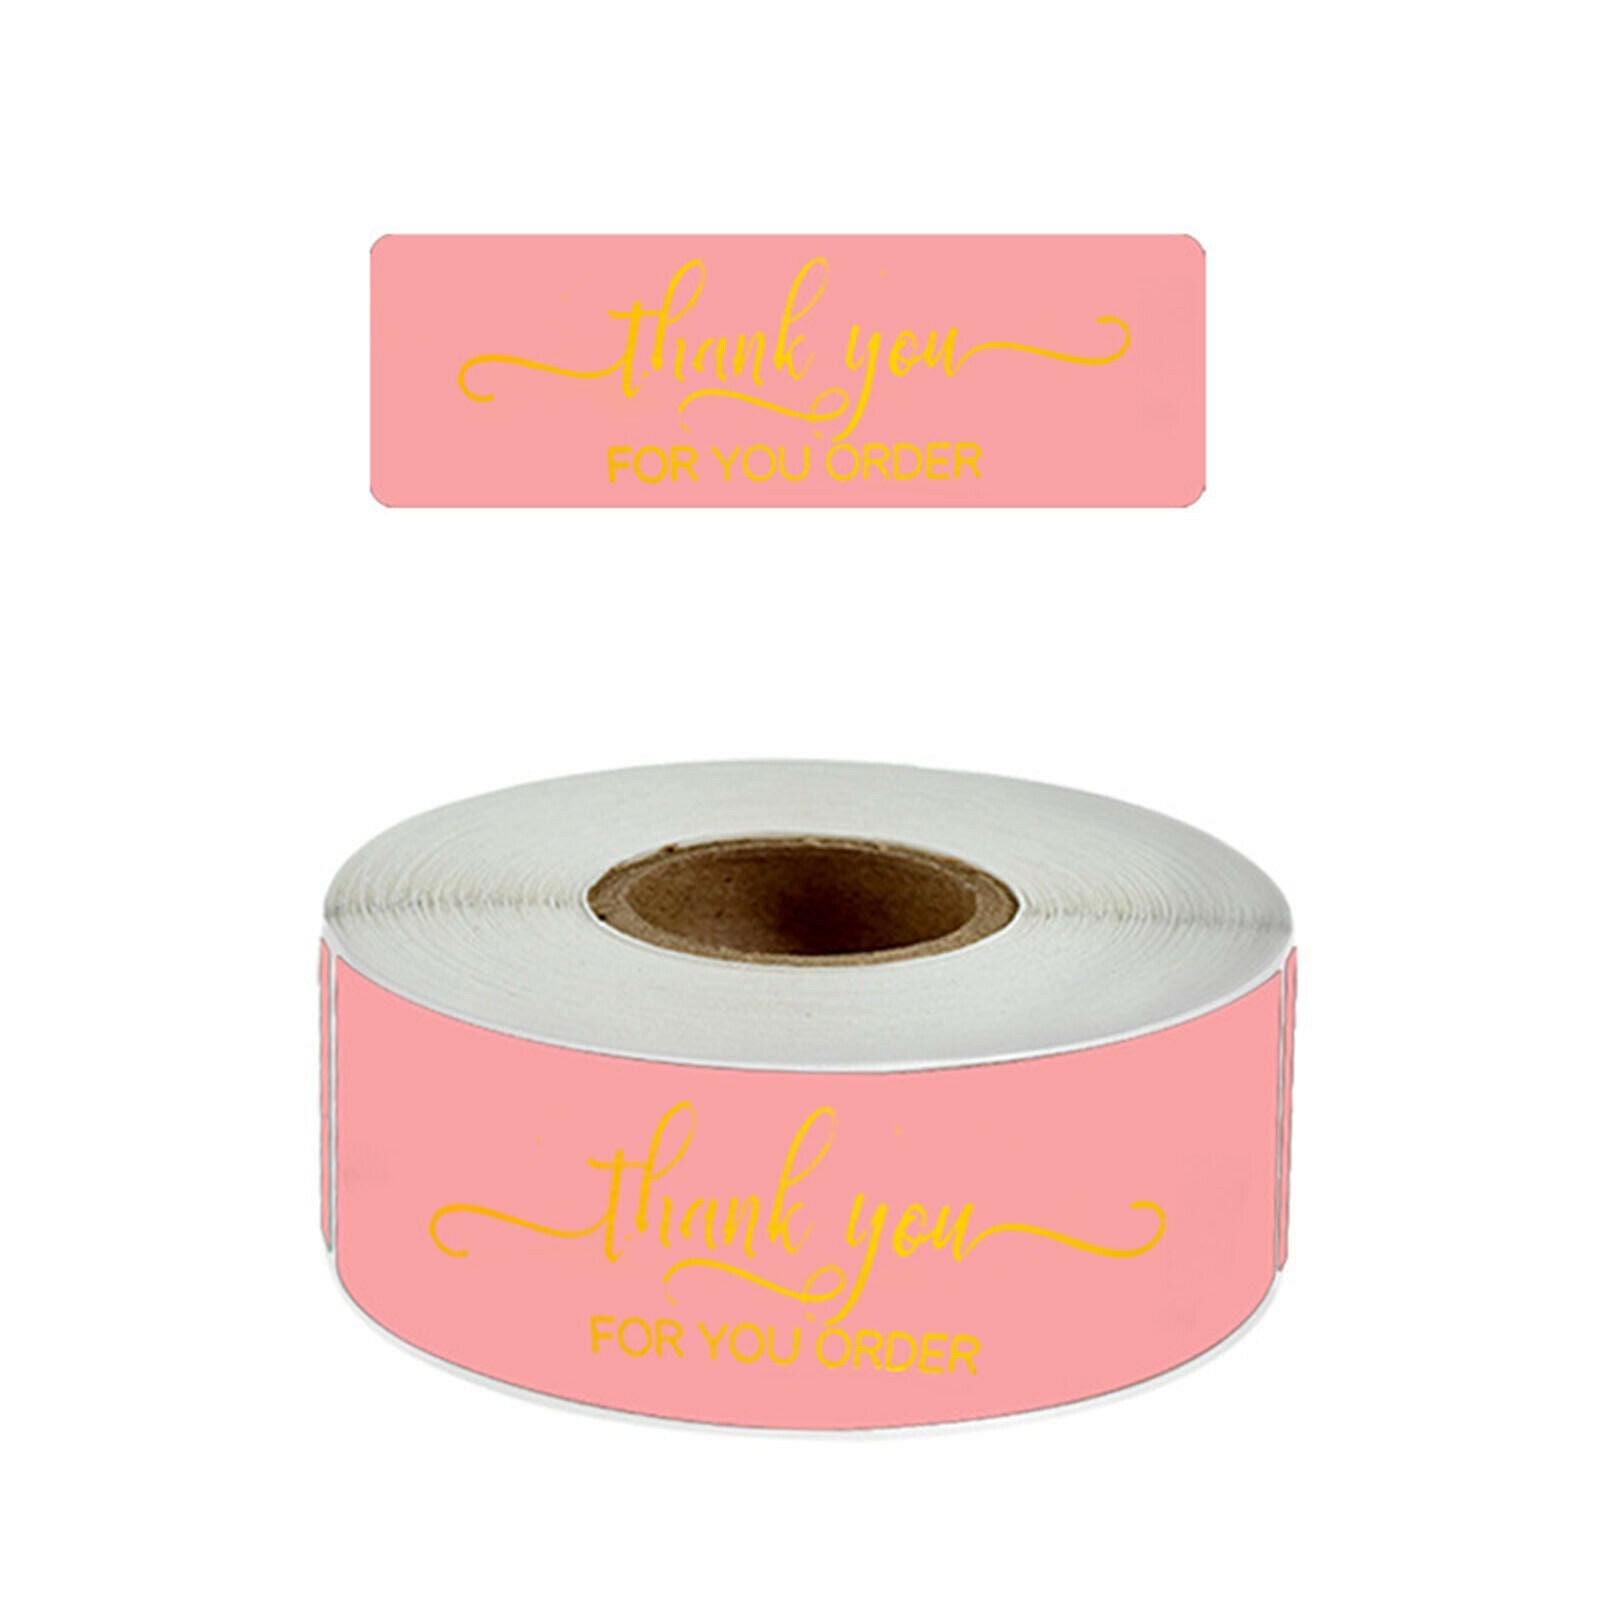 Thank You For Your Order Stickers Small Shop Decor Envelope Sealing Labels